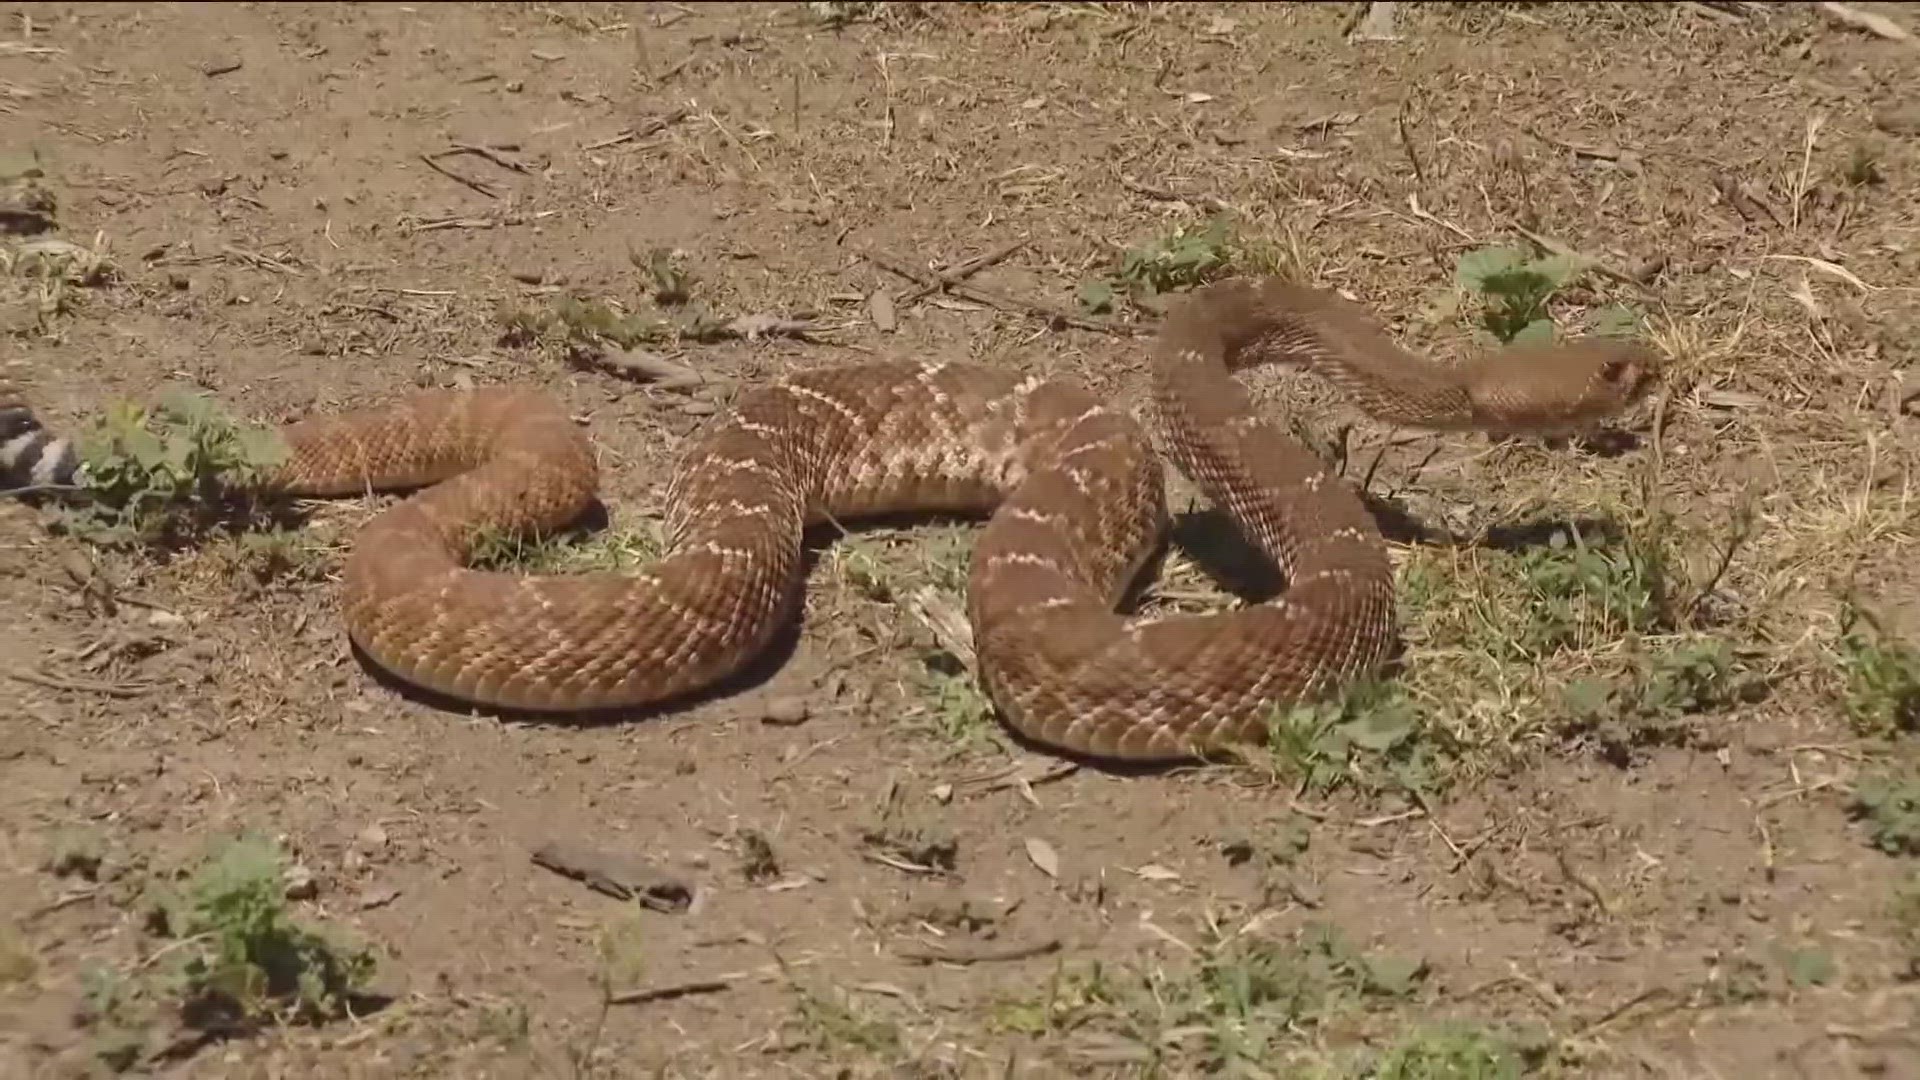 "We had seven calls Sunday, five on Saturday. I'm sure we'll have many today," said snake wrangler Bruce Ireland.